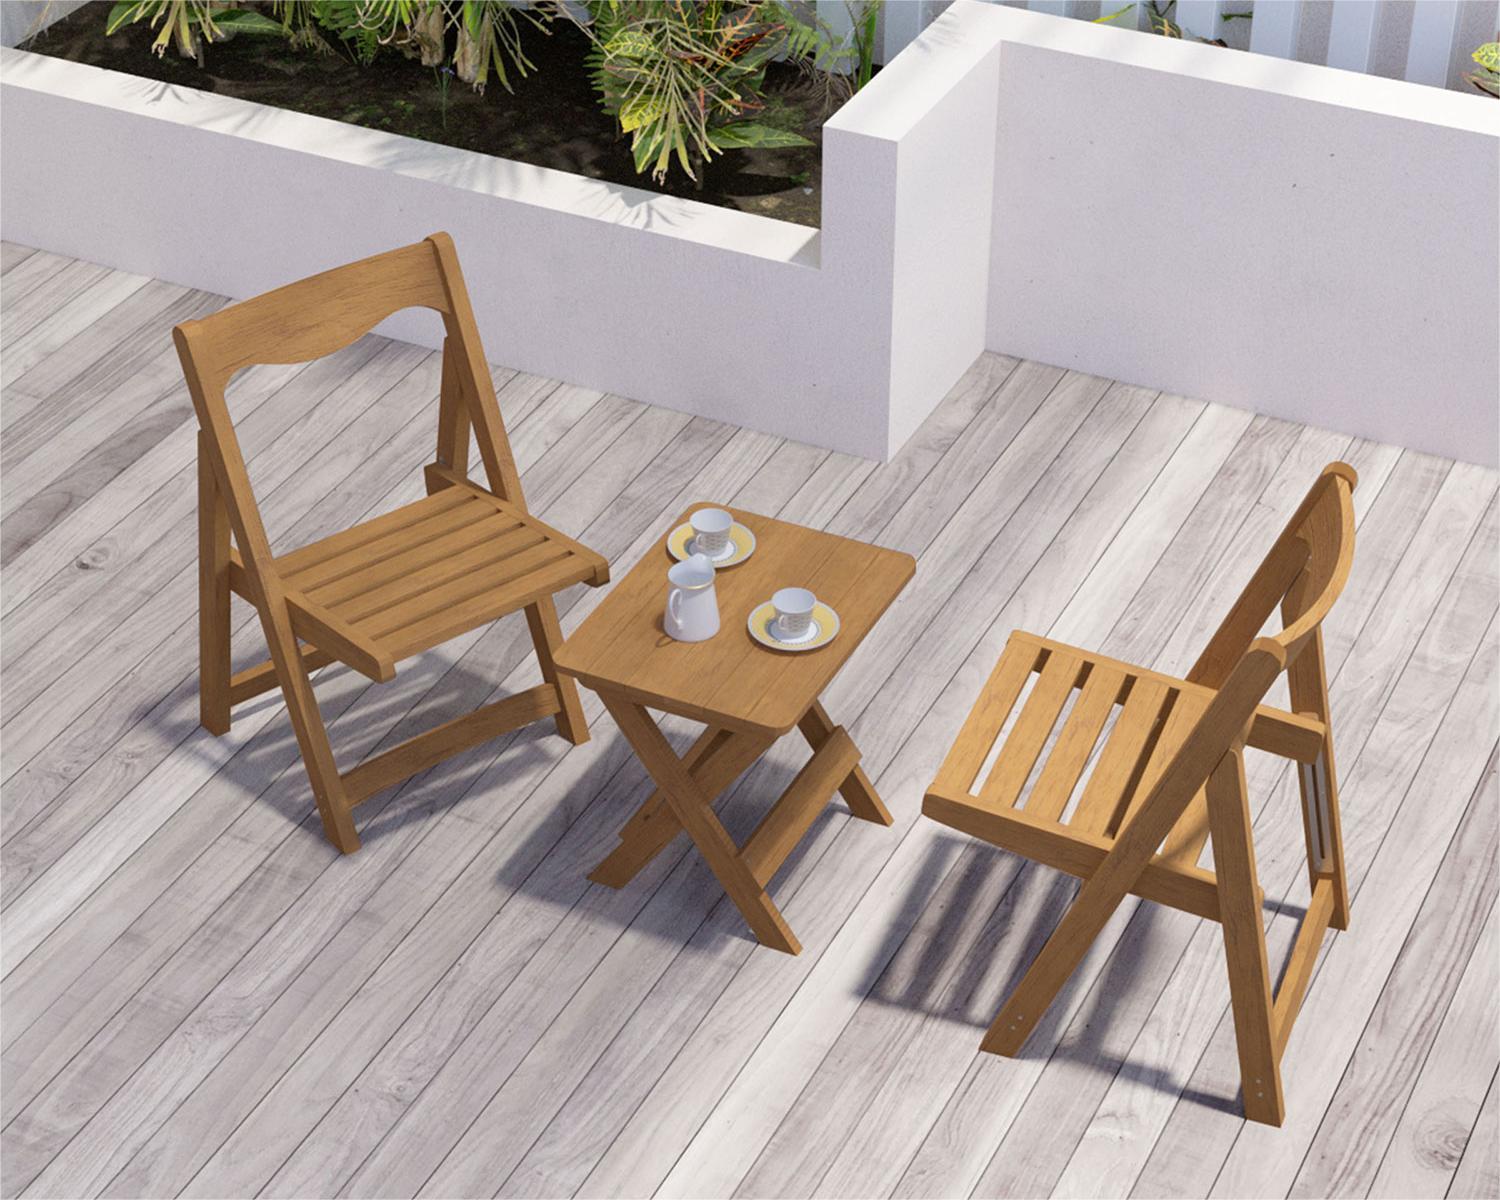 HIPS Material Outdoor Bistro Set Foldable Small Table teak-hdpe